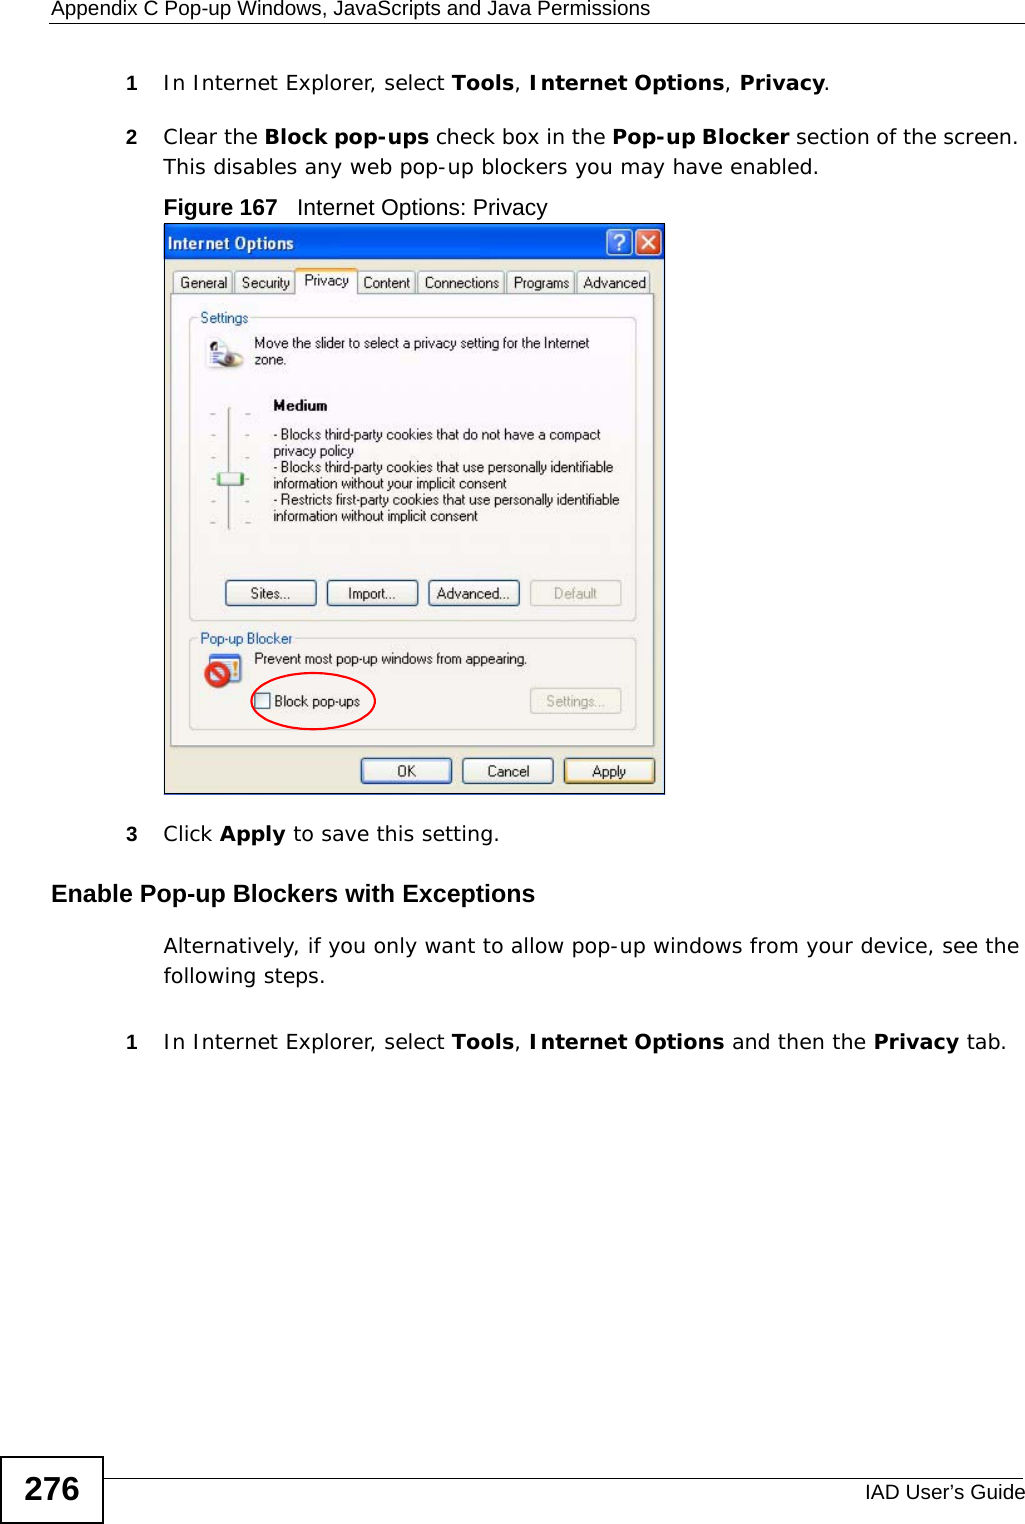 Appendix C Pop-up Windows, JavaScripts and Java PermissionsIAD User’s Guide2761In Internet Explorer, select Tools, Internet Options, Privacy.2Clear the Block pop-ups check box in the Pop-up Blocker section of the screen. This disables any web pop-up blockers you may have enabled. Figure 167   Internet Options: Privacy3Click Apply to save this setting.Enable Pop-up Blockers with ExceptionsAlternatively, if you only want to allow pop-up windows from your device, see the following steps.1In Internet Explorer, select Tools, Internet Options and then the Privacy tab. 